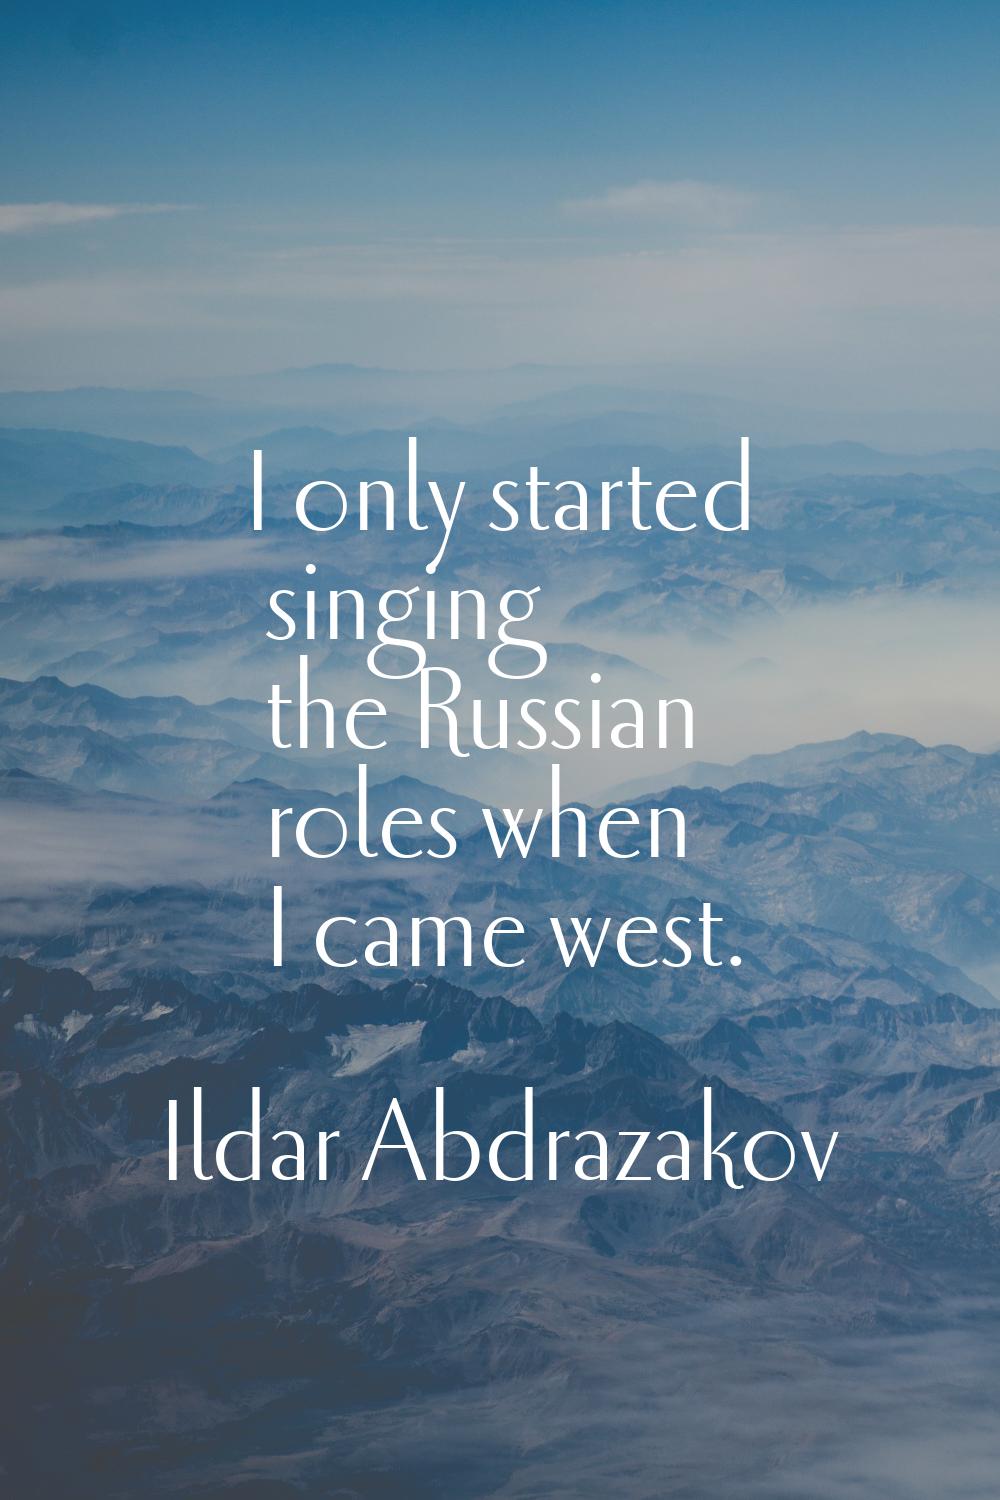 I only started singing the Russian roles when I came west.